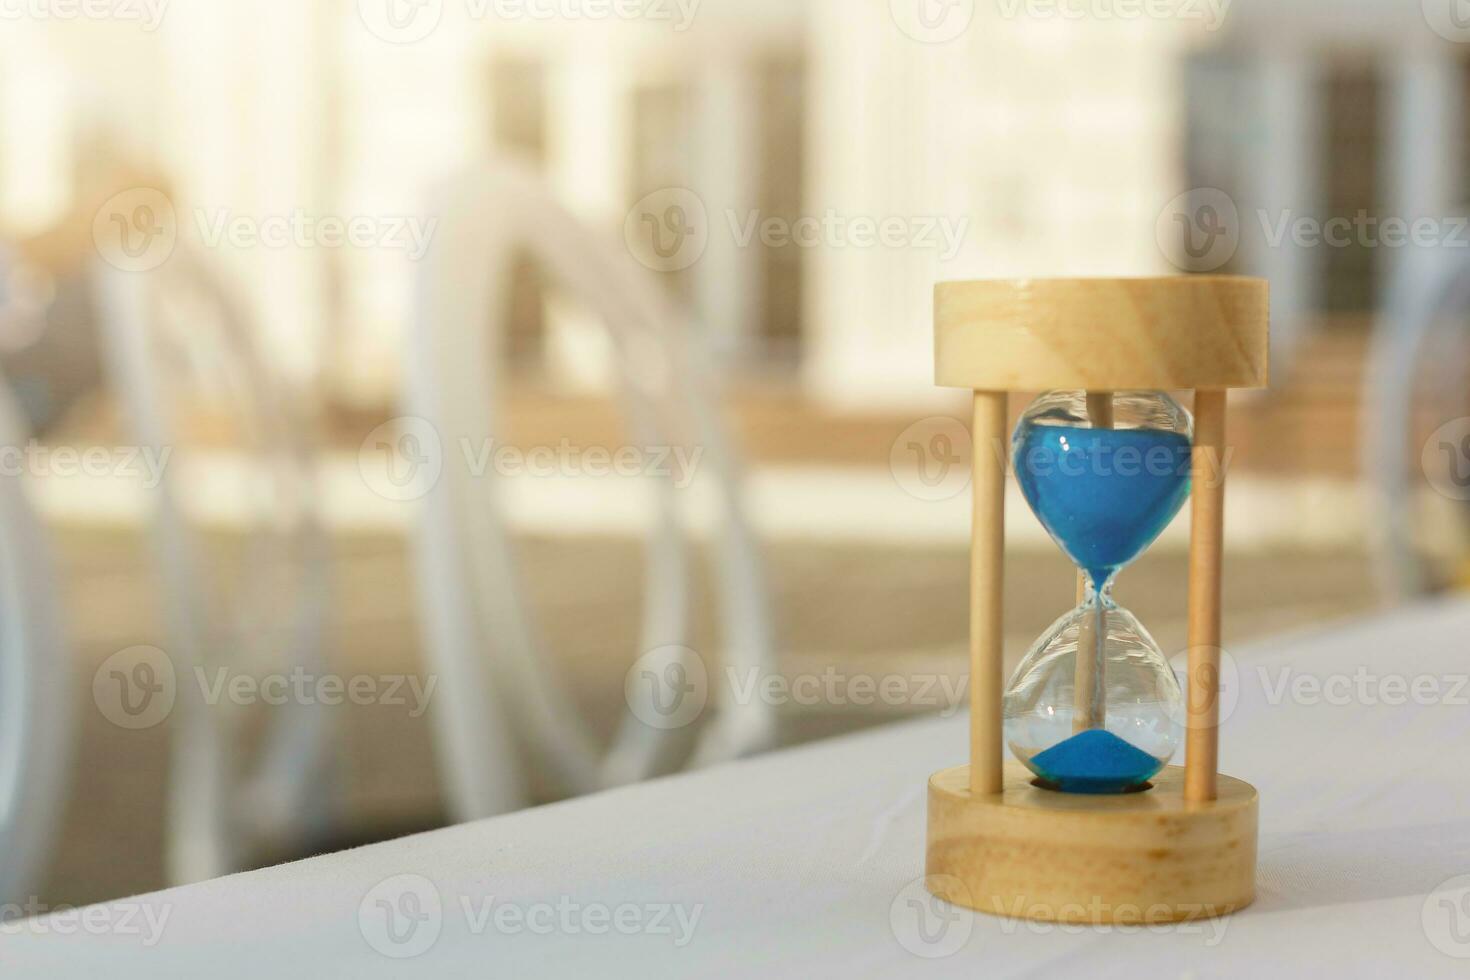 Wood hourglass or sandglass with home. Invertible device with two connected glass bulbs containing sand that takes an hour to pass from upper to lower bulb. Concept for business deadline times photo